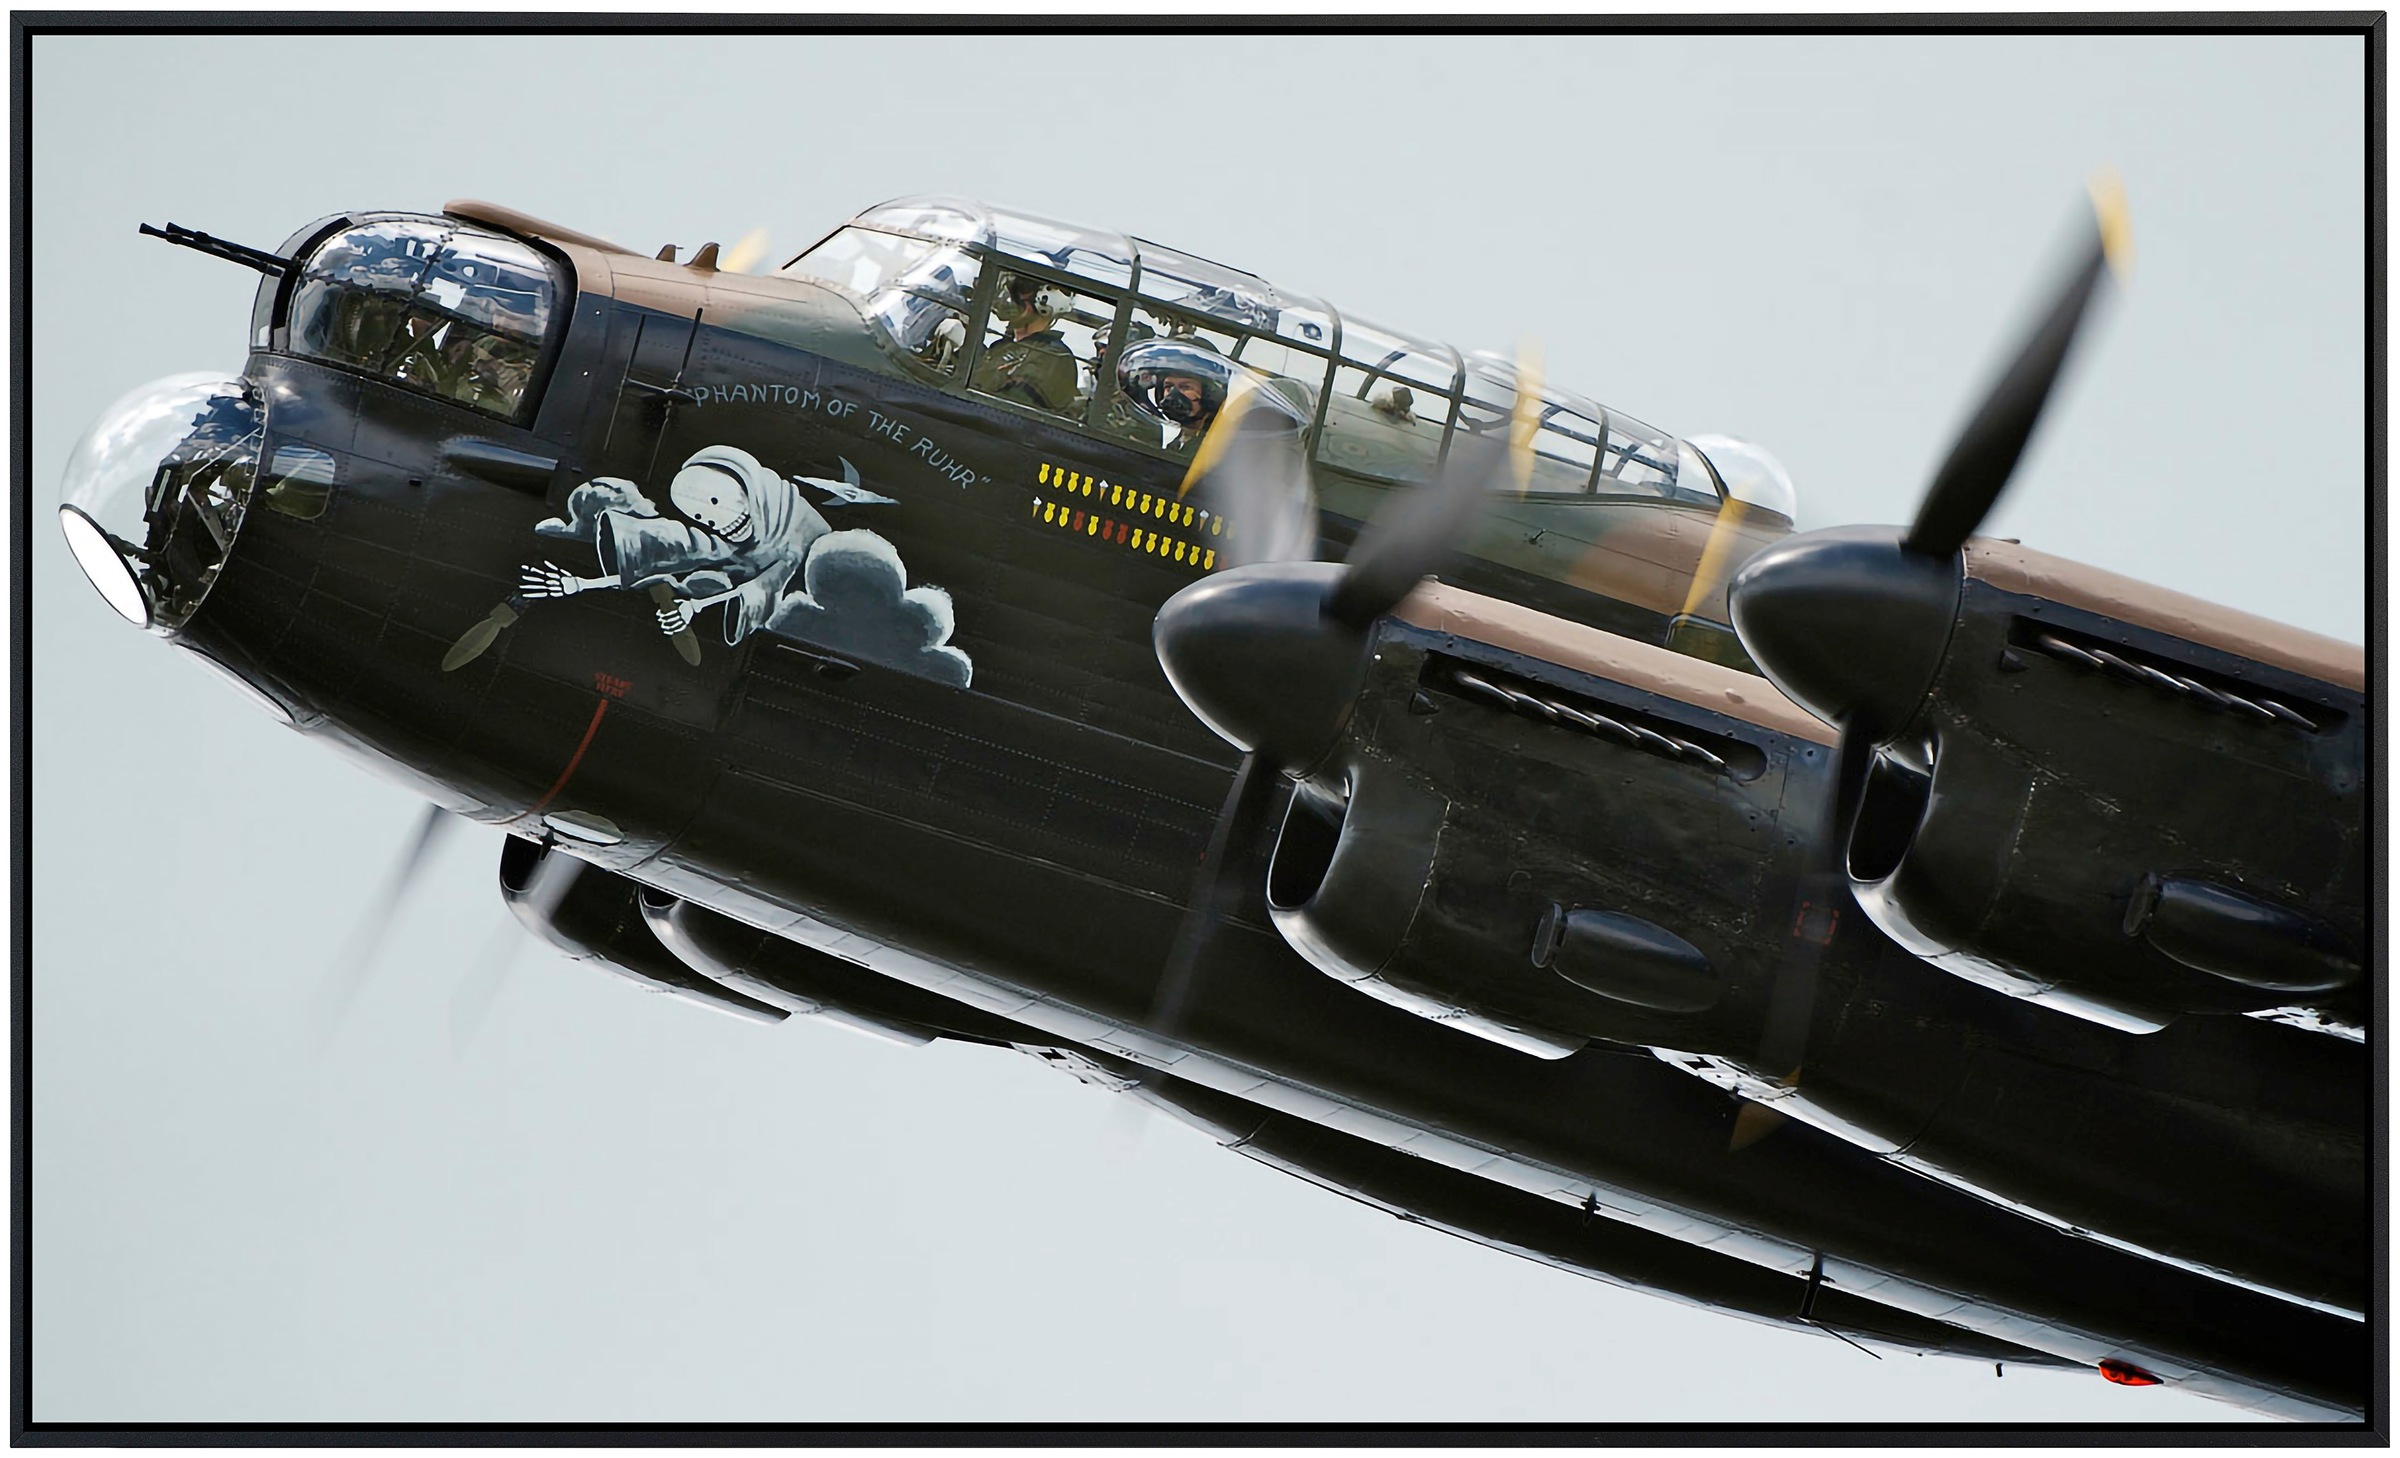 Papermoon Infrarotheizung »Lancaster BBMF Bomber«, sehr angenehme Strahlungswärme